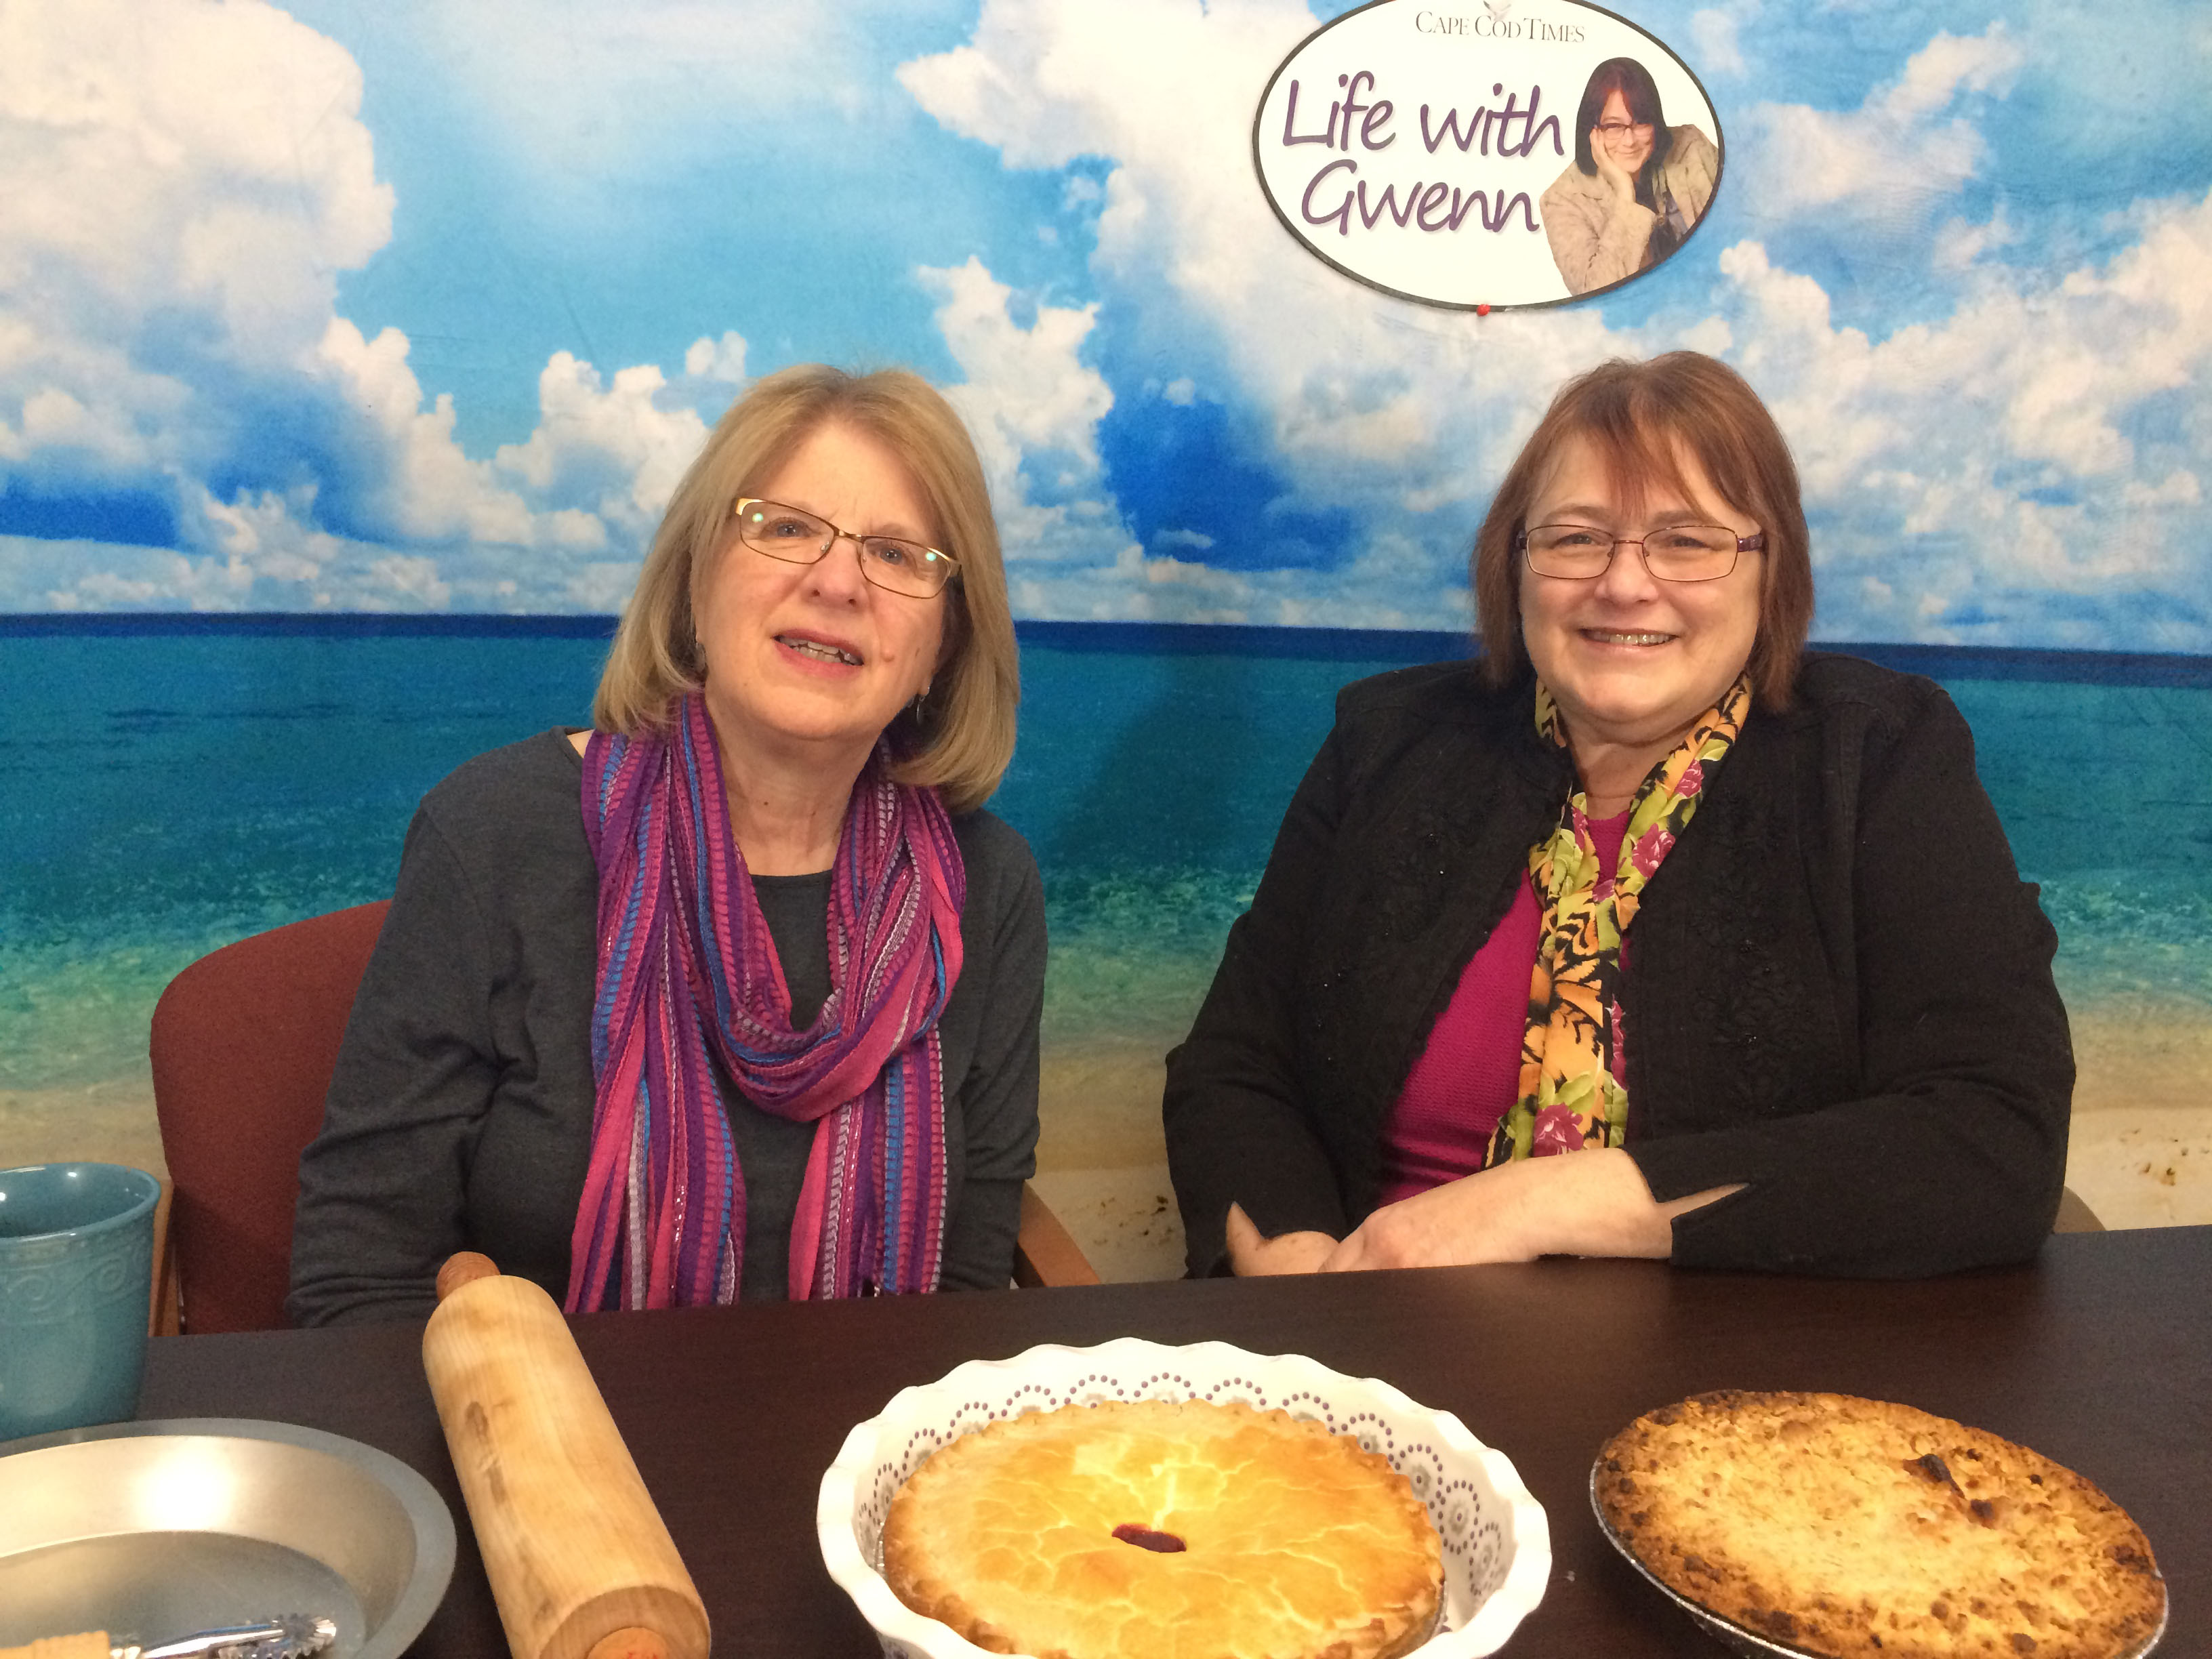 Getting ready for Pi Day on ‘Life with Gwenn’